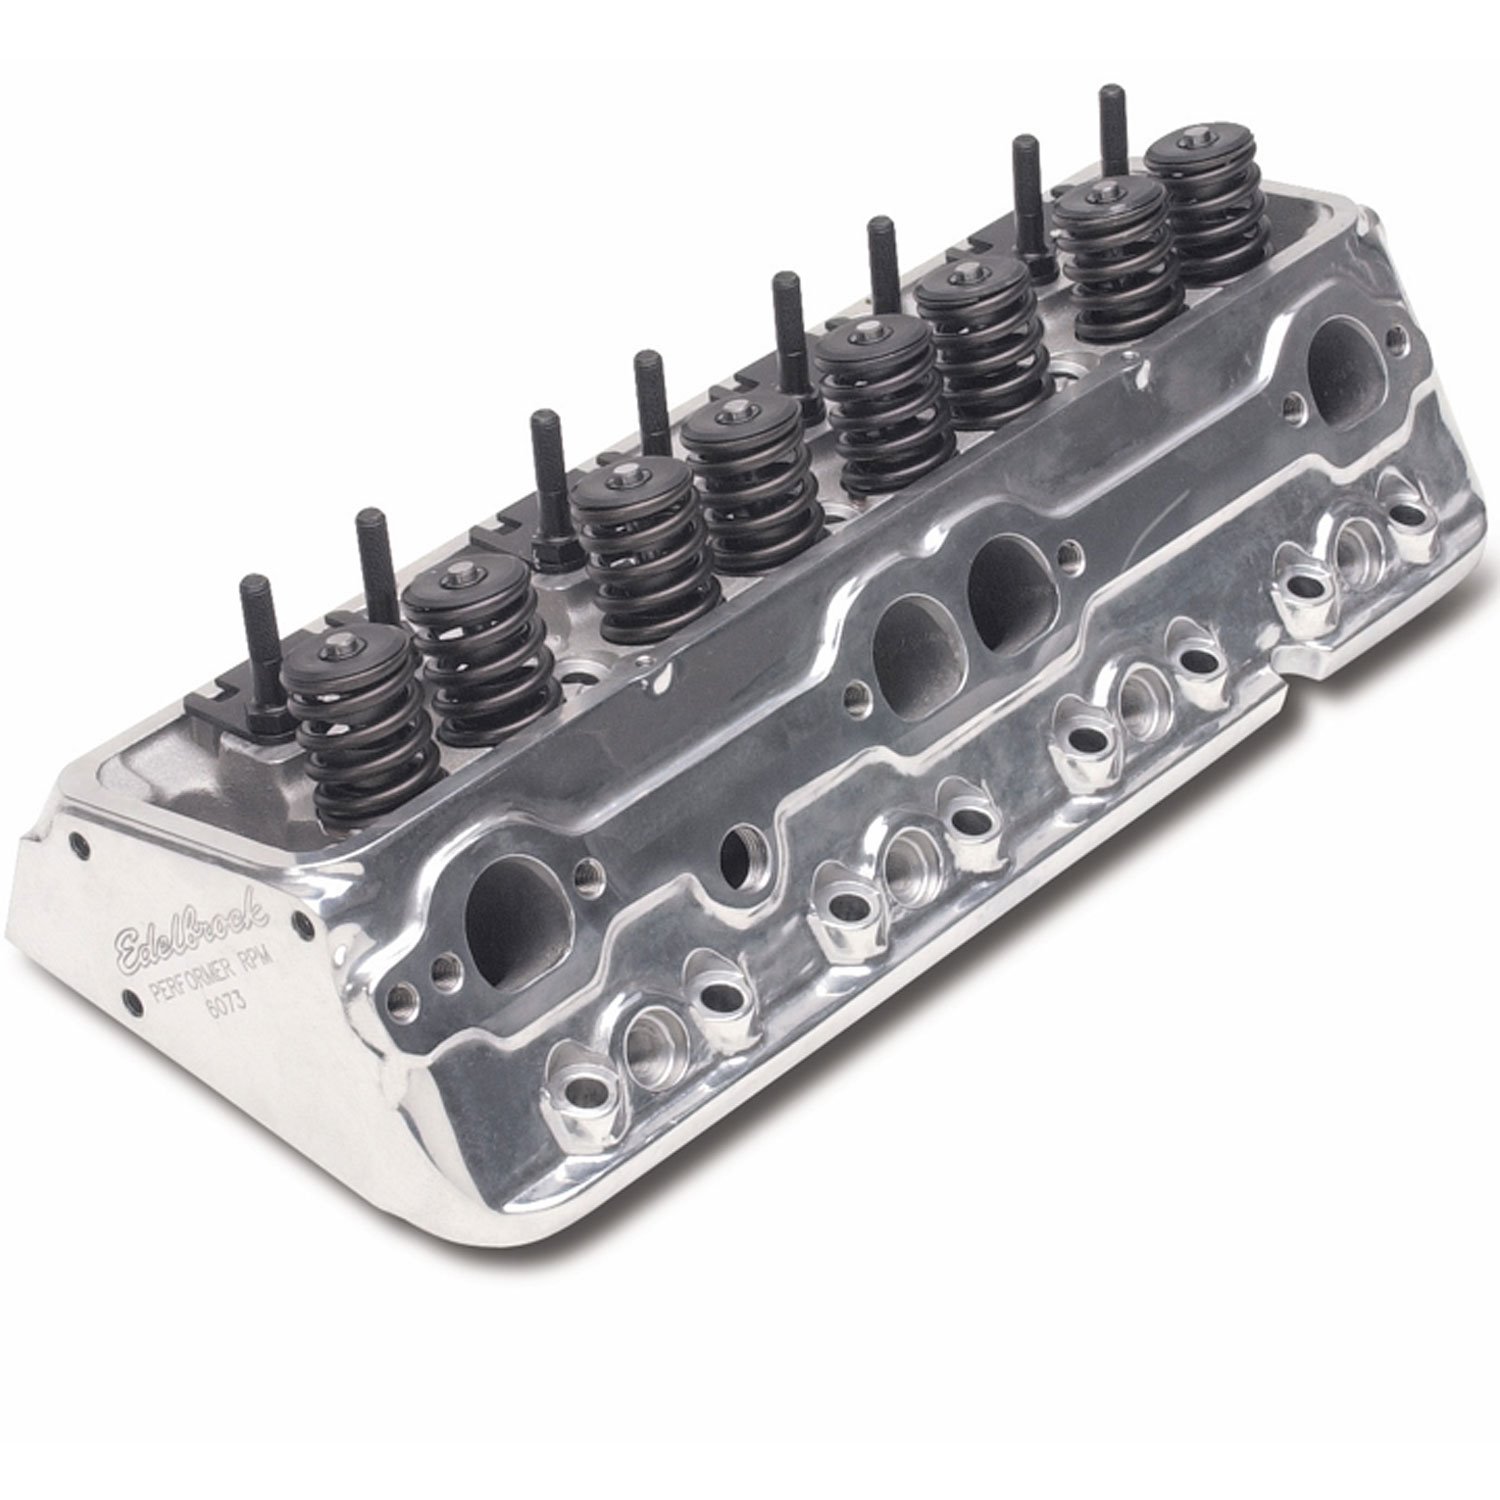 Performer RPM Polished Cylinder Head for Small Block Chevy